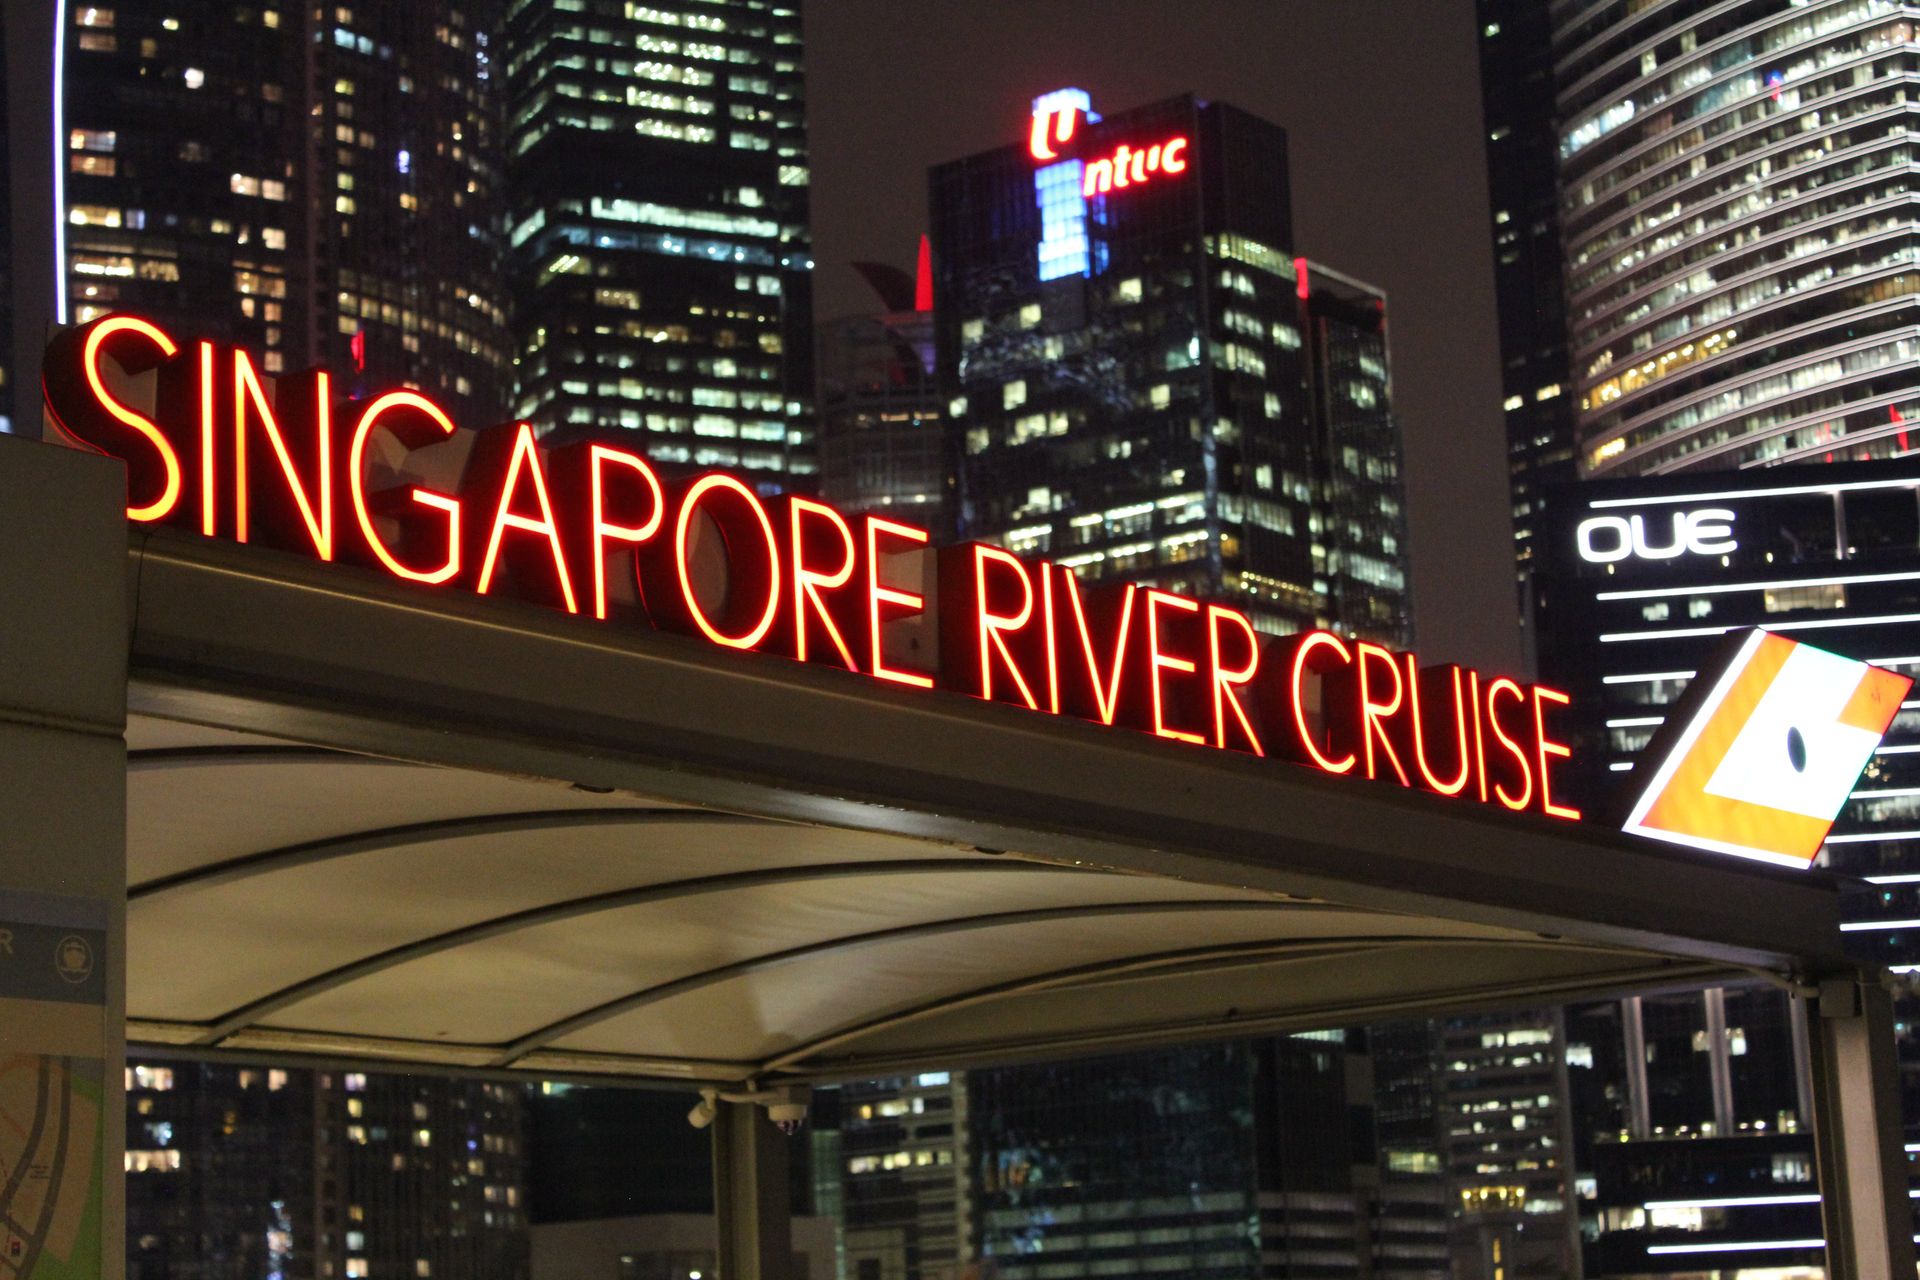 Singapore River Cruise Ticket Office